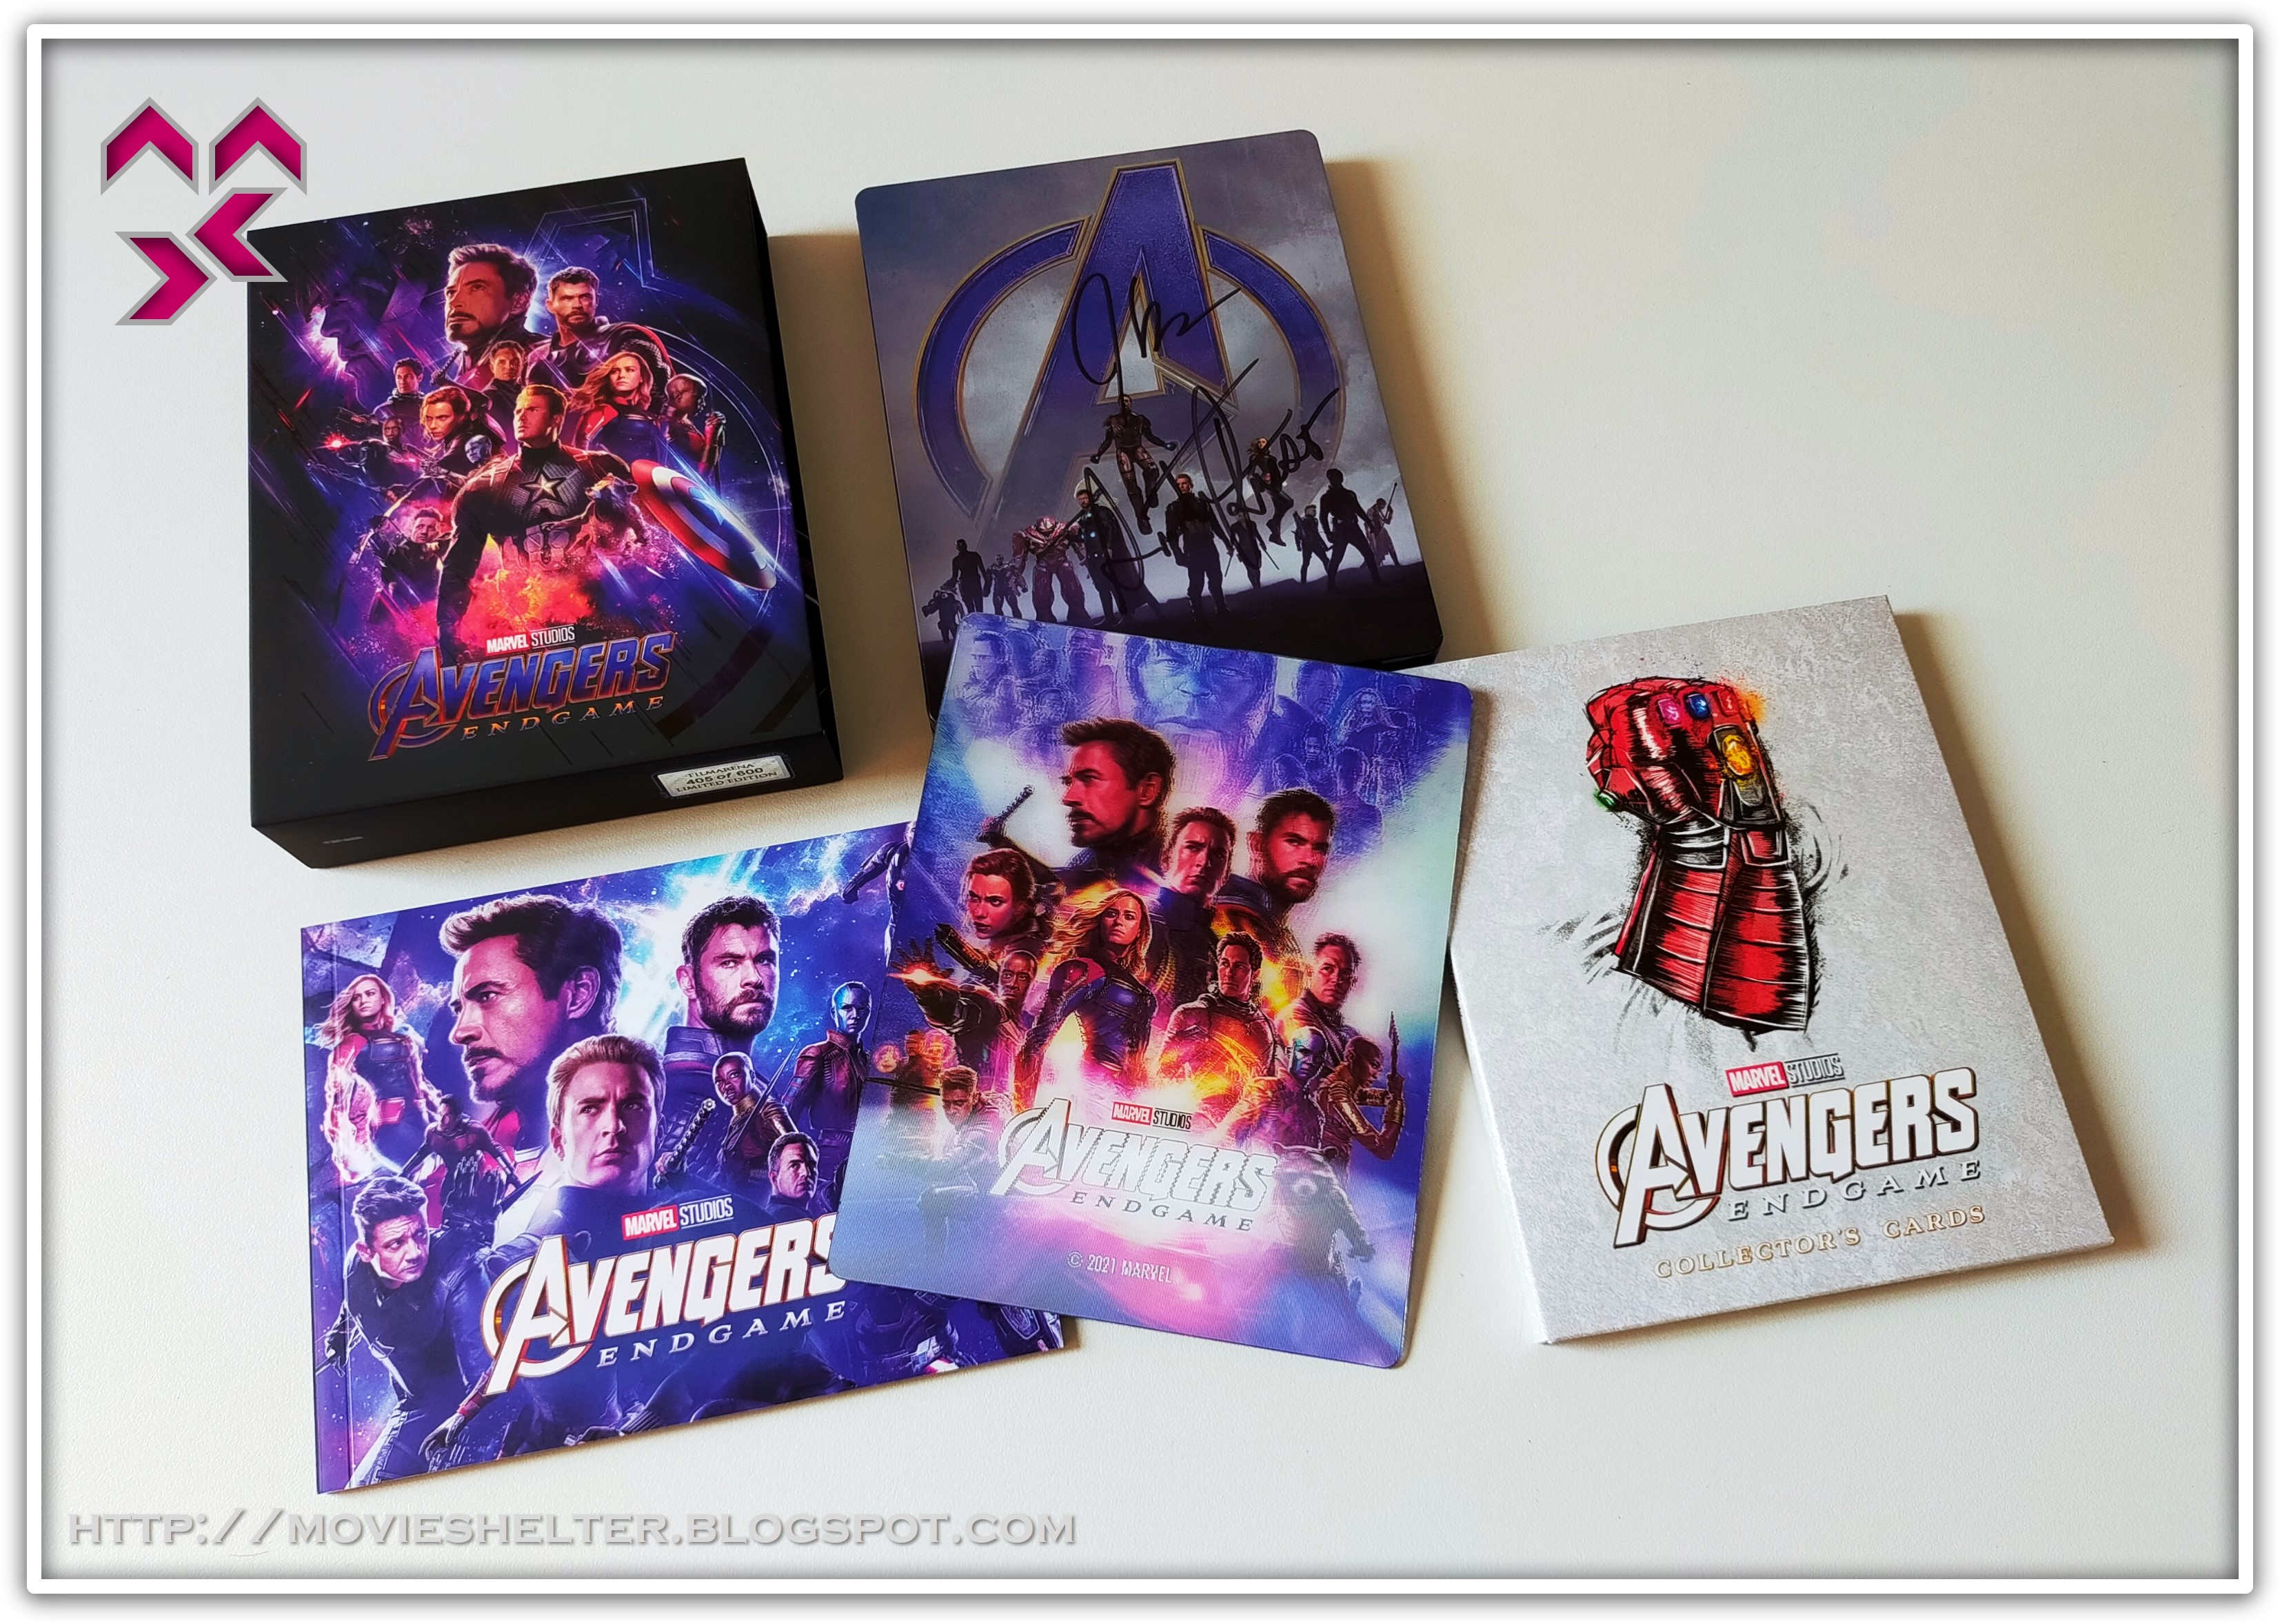 Avengers_Endgame_XL_Full_Slip_Limited_SteelBook_Edition_FilmArena_Collection_Signed_by_Anthony_Russo_Joe_Russo_14.jpg